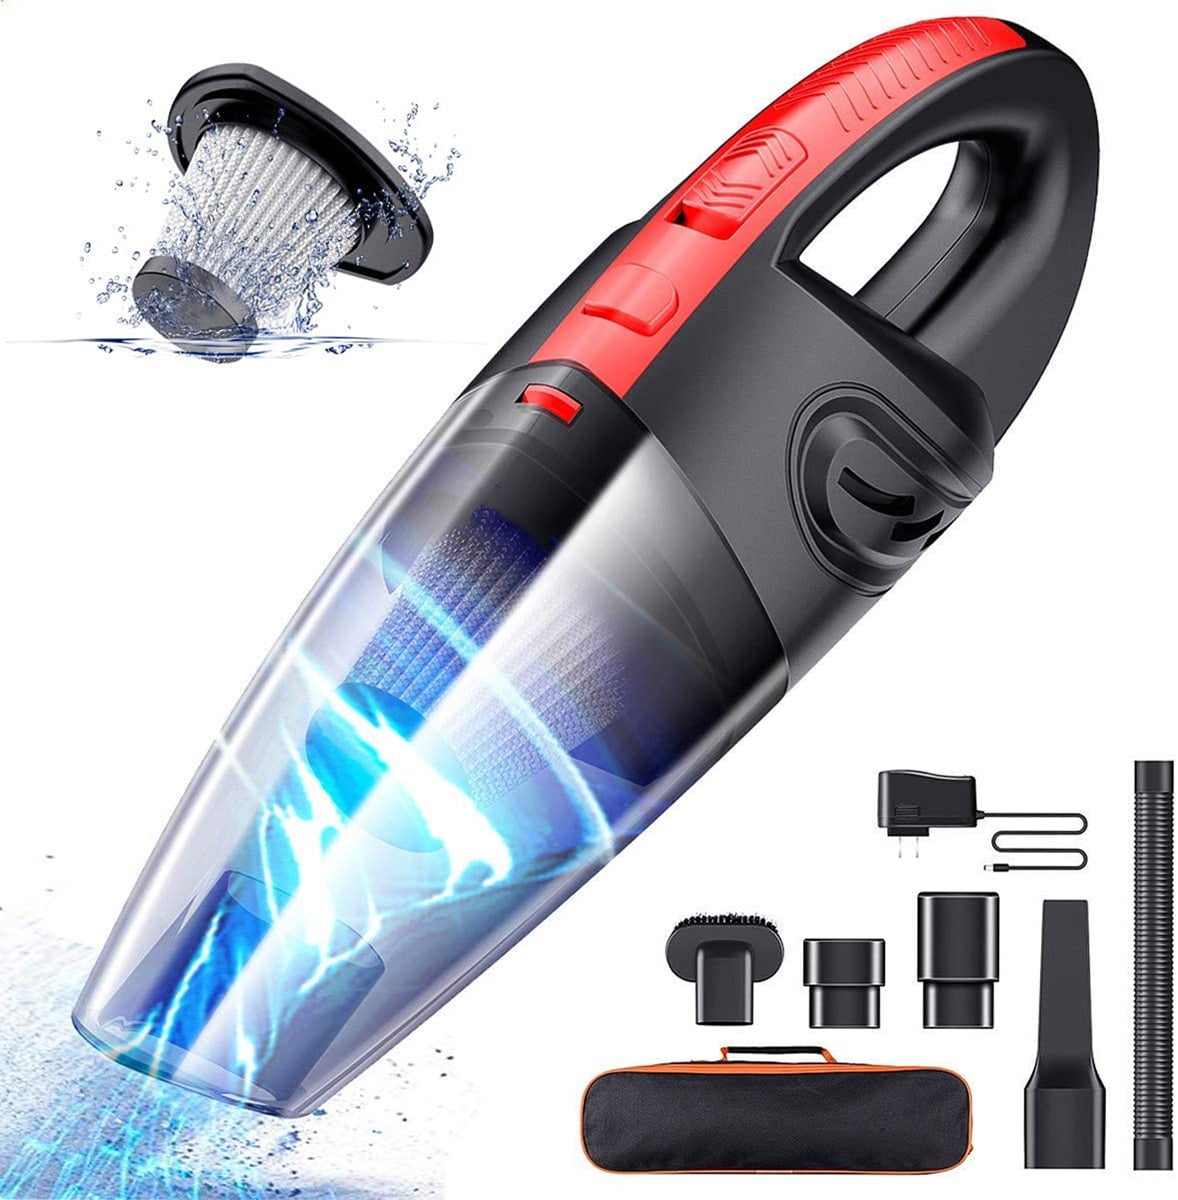 100W High Power Rechargeable Cordless Wet & Dry Portable Car Home Vacuum Cleaner 